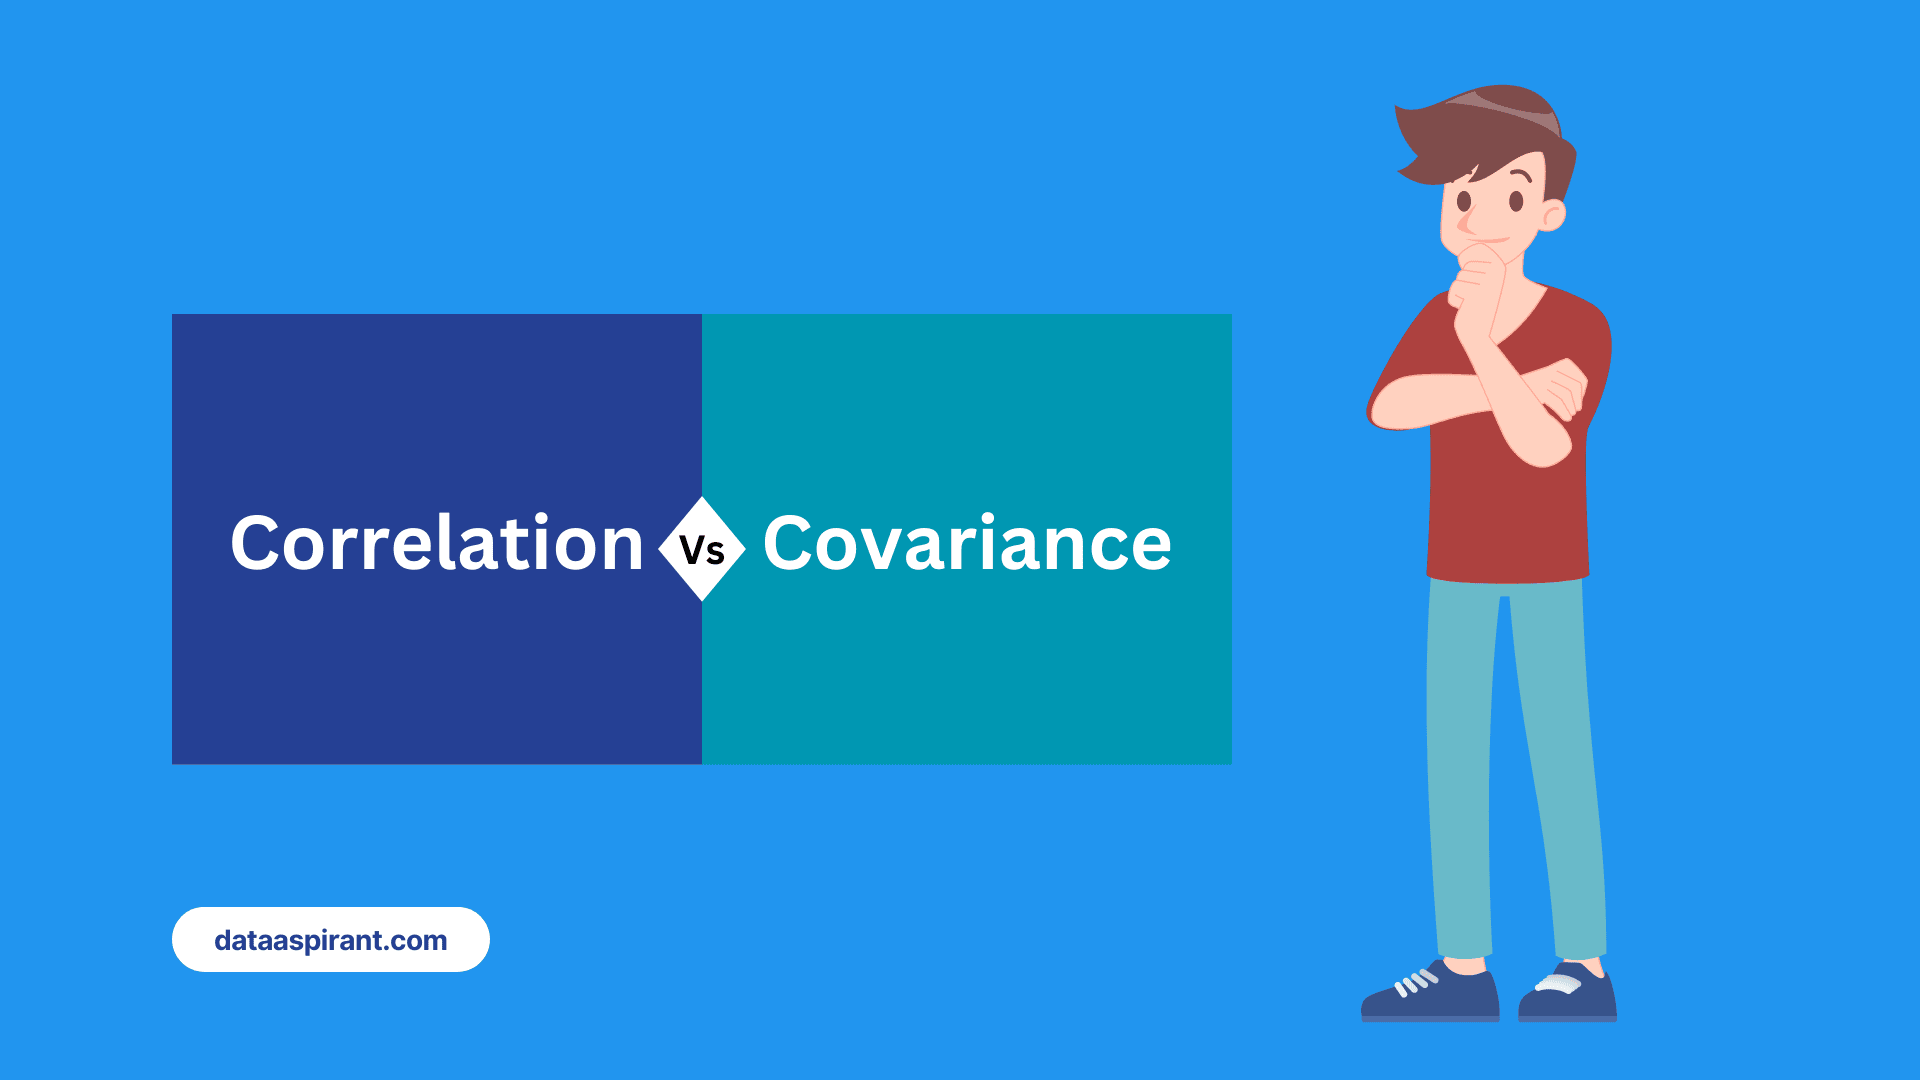 A Brief Overview of Correlation and Covariance